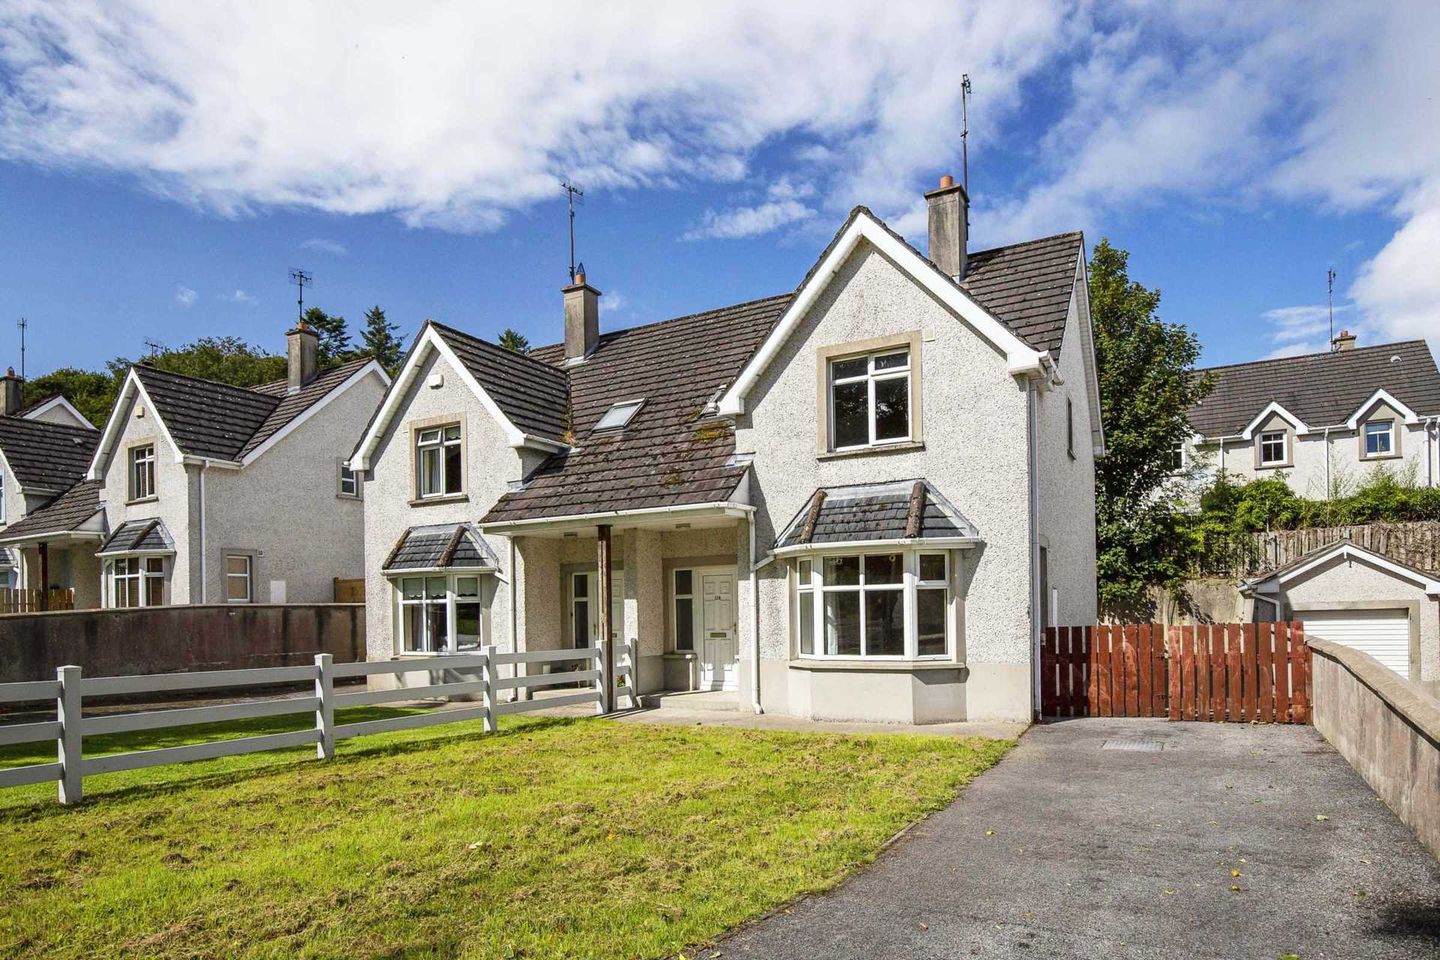 114 Ballymacool Wood, Letterkenny, Co. Donegal